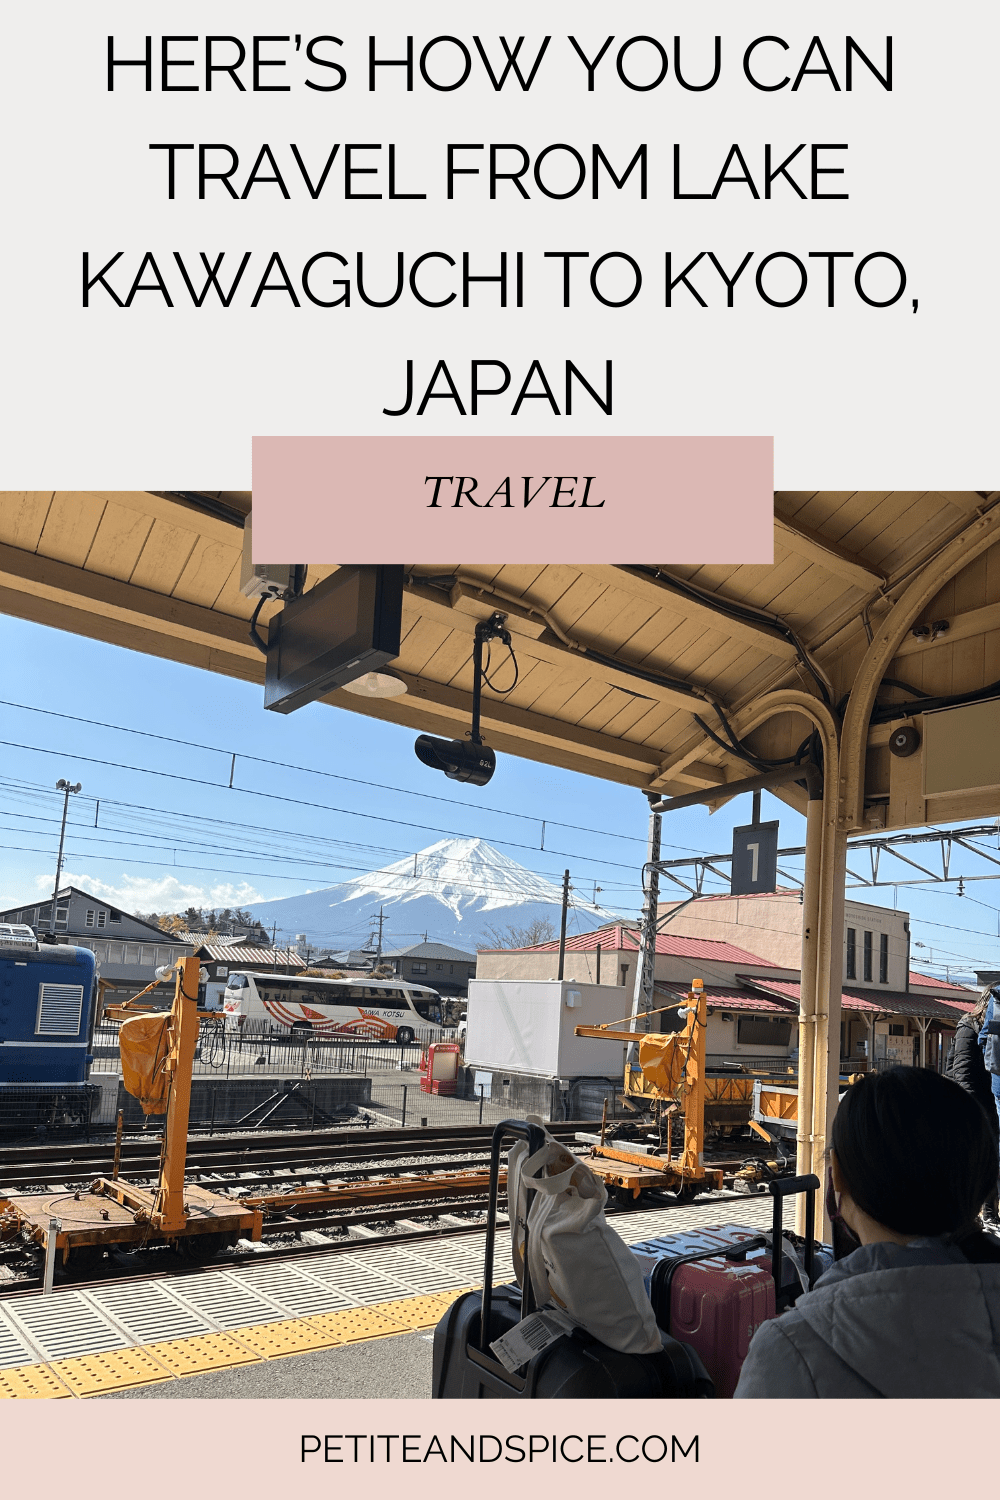 Here’s How You Can Travel from Lake Kawaguchi to Kyoto, Japan